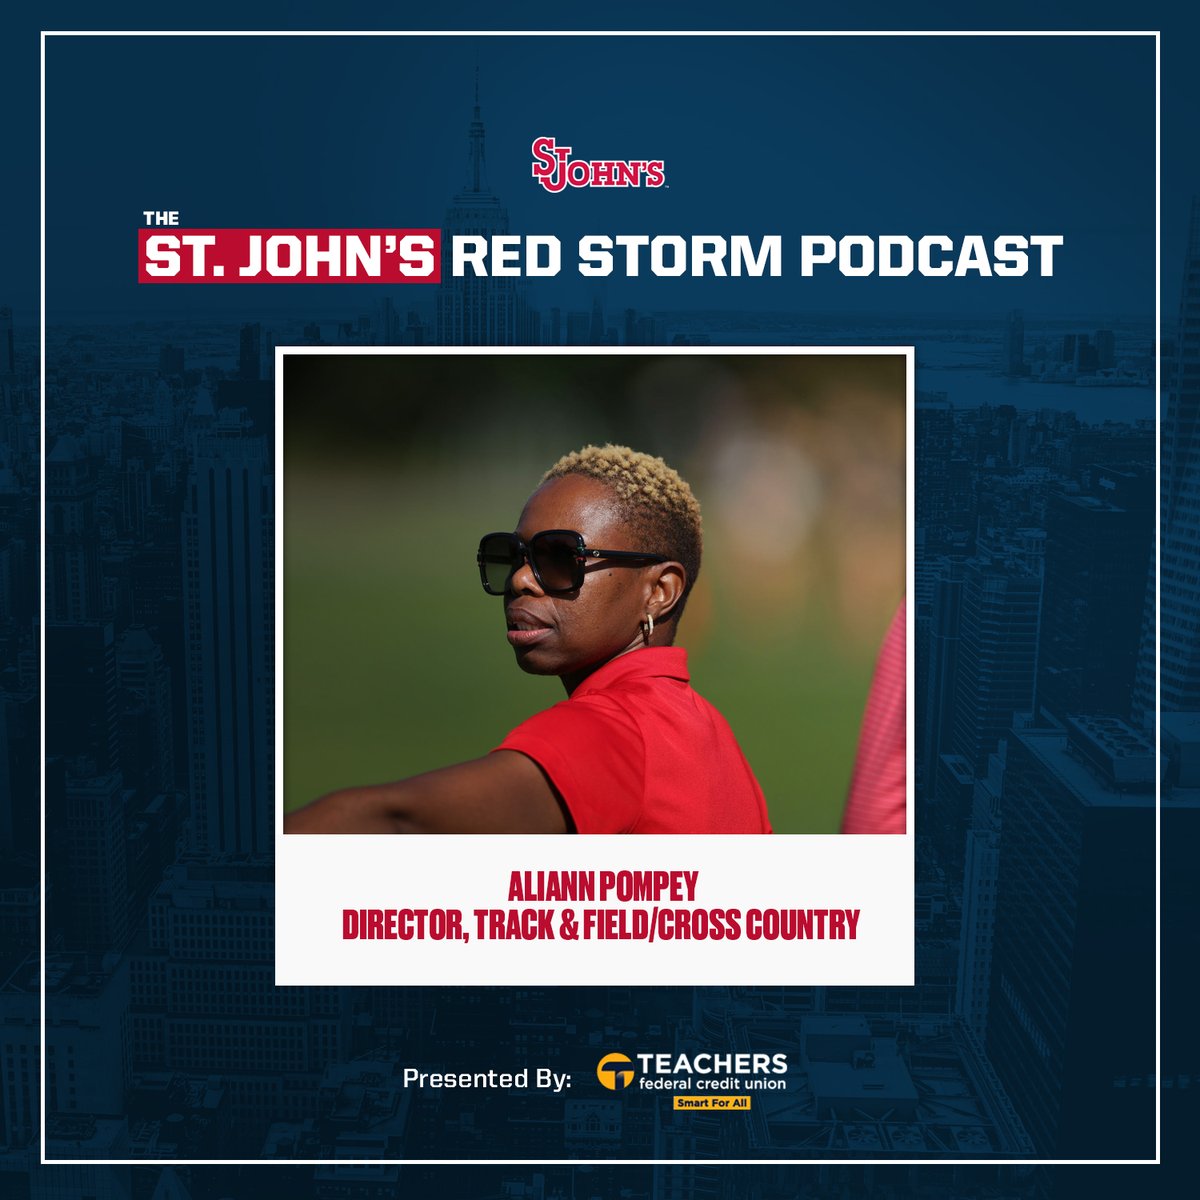 🚨NEW EPISODE OUT NOW🚨 Episode 22 features @StJohnsTFXC Director, Aliann Pompey! 🏃‍♀️ Listen ⤵️ Spotify- spoti.fi/3Wq7sZe iHeart Radio- ihr.fm/4dqZ1Tg Apple Podcasts- apple.co/4dpkxYz